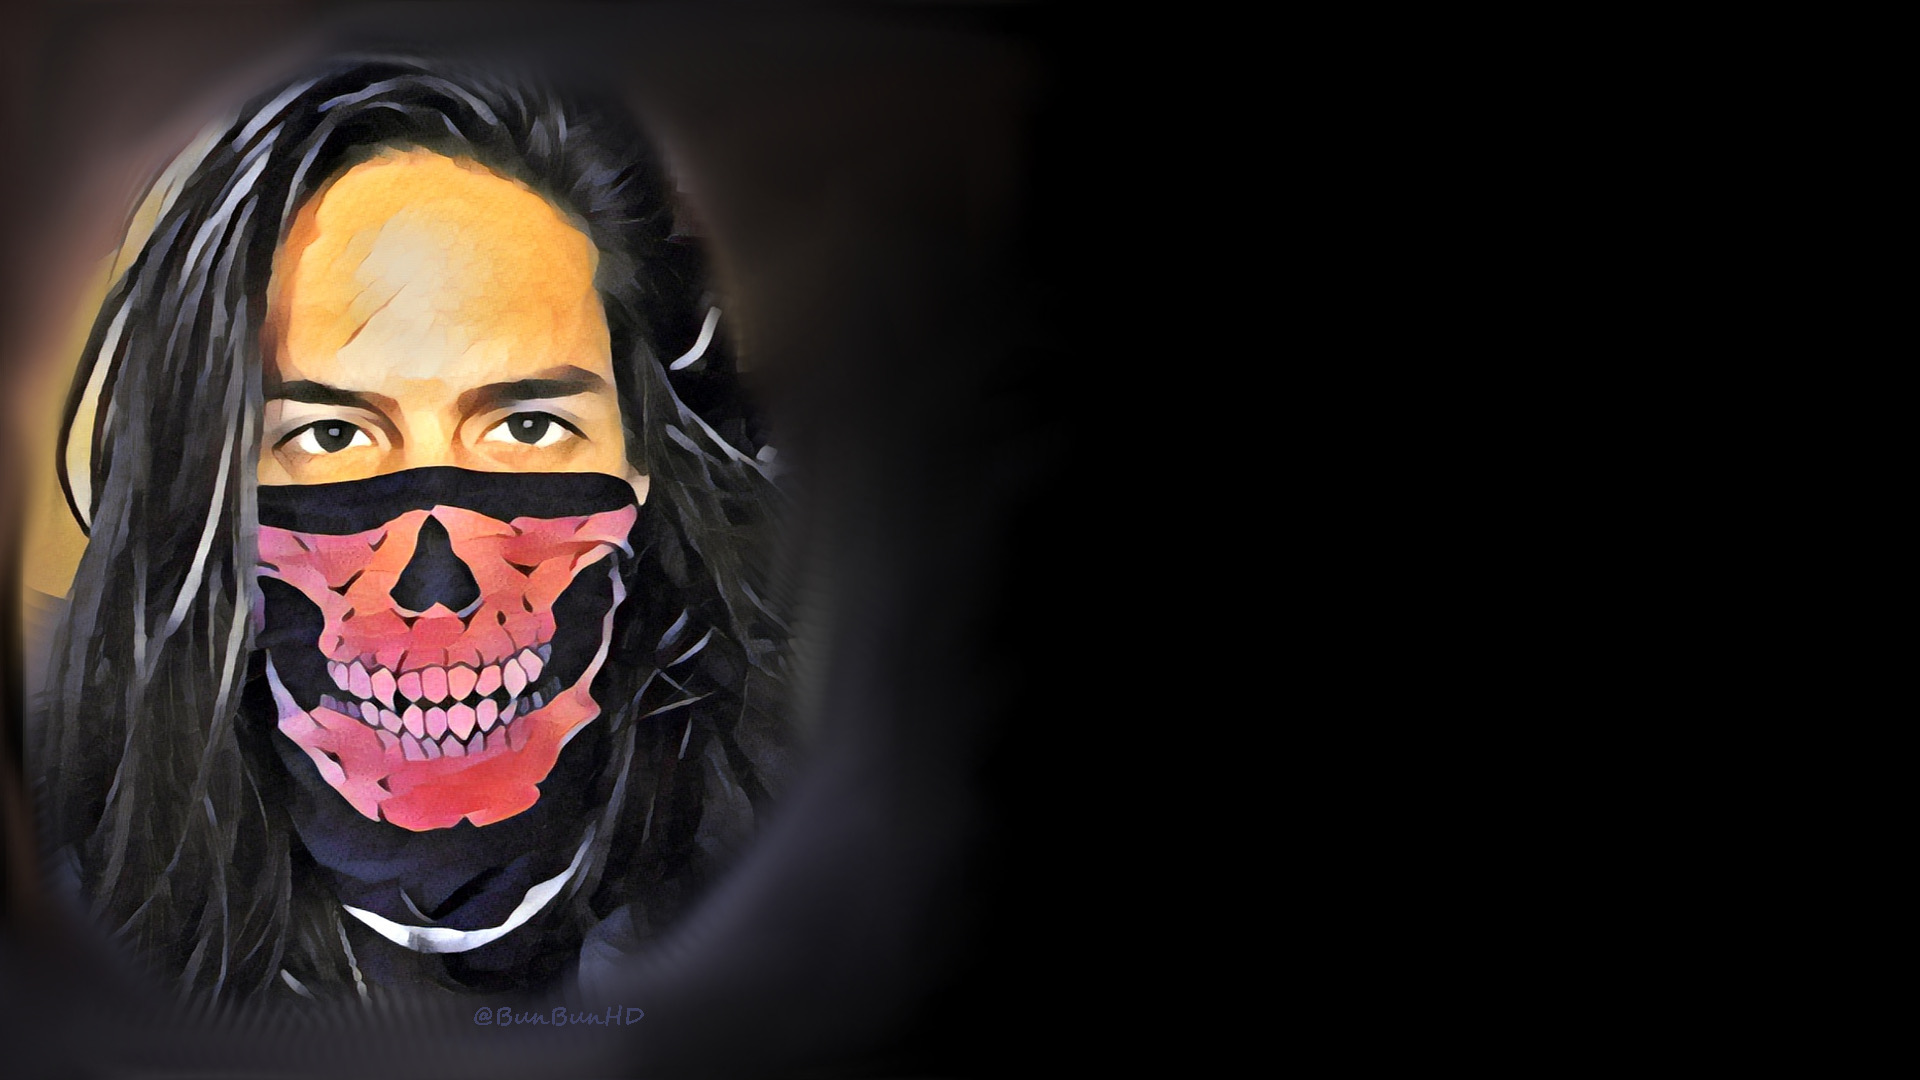 Skull Mask Twitch Gamers 1920x1080